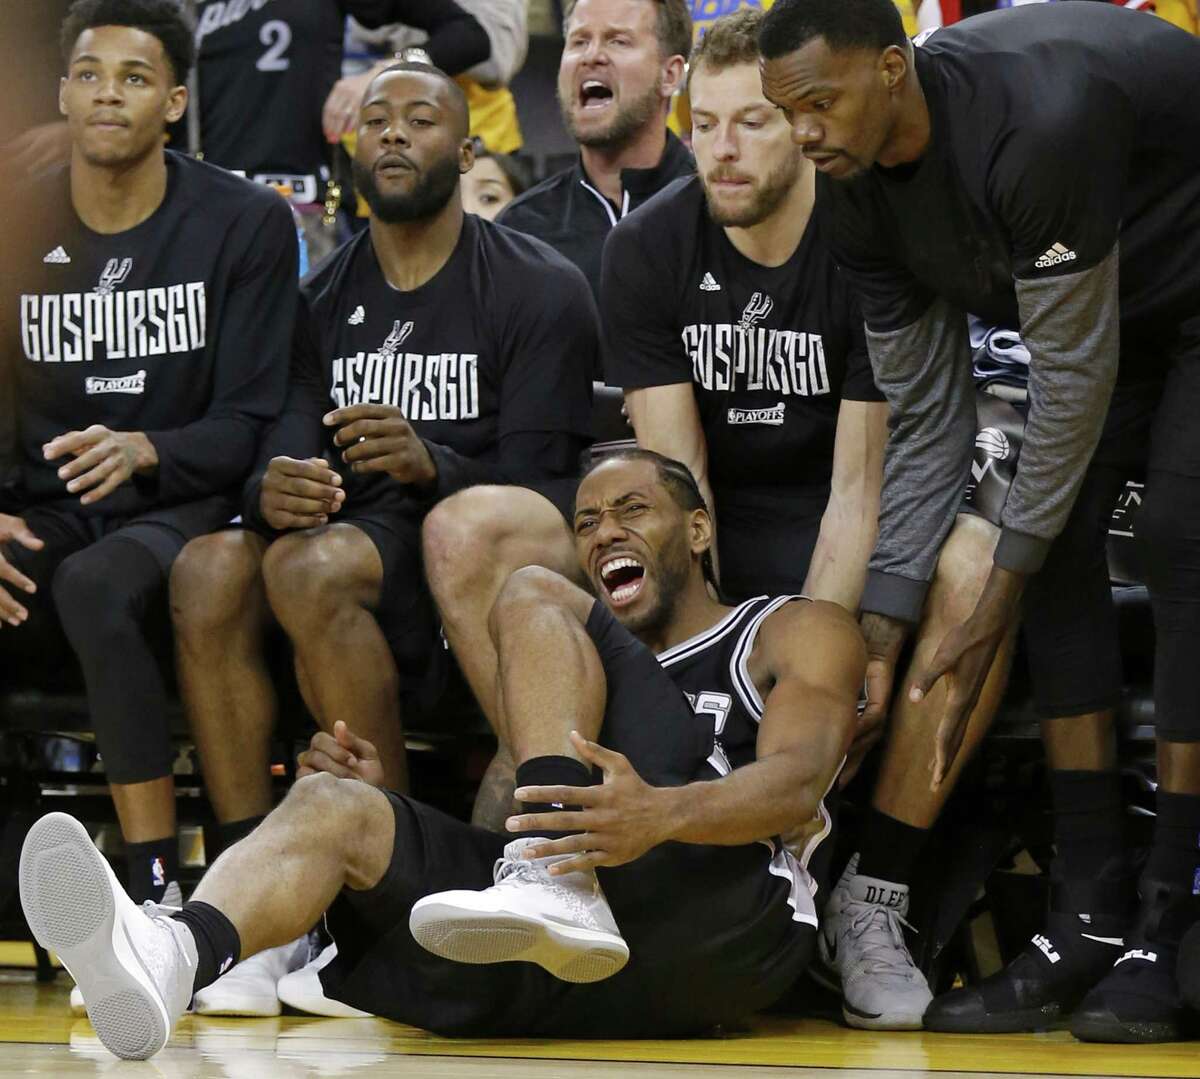 San Antonio Spurs' Kawhi Leonard reacts after being injured on a play during second half action of Game 1 in the Western Conference Finals against the Golden State Warriors Sunday May 14, 2017 at Oracle Arena in Oakland, CA. The Warriors won 113-111.